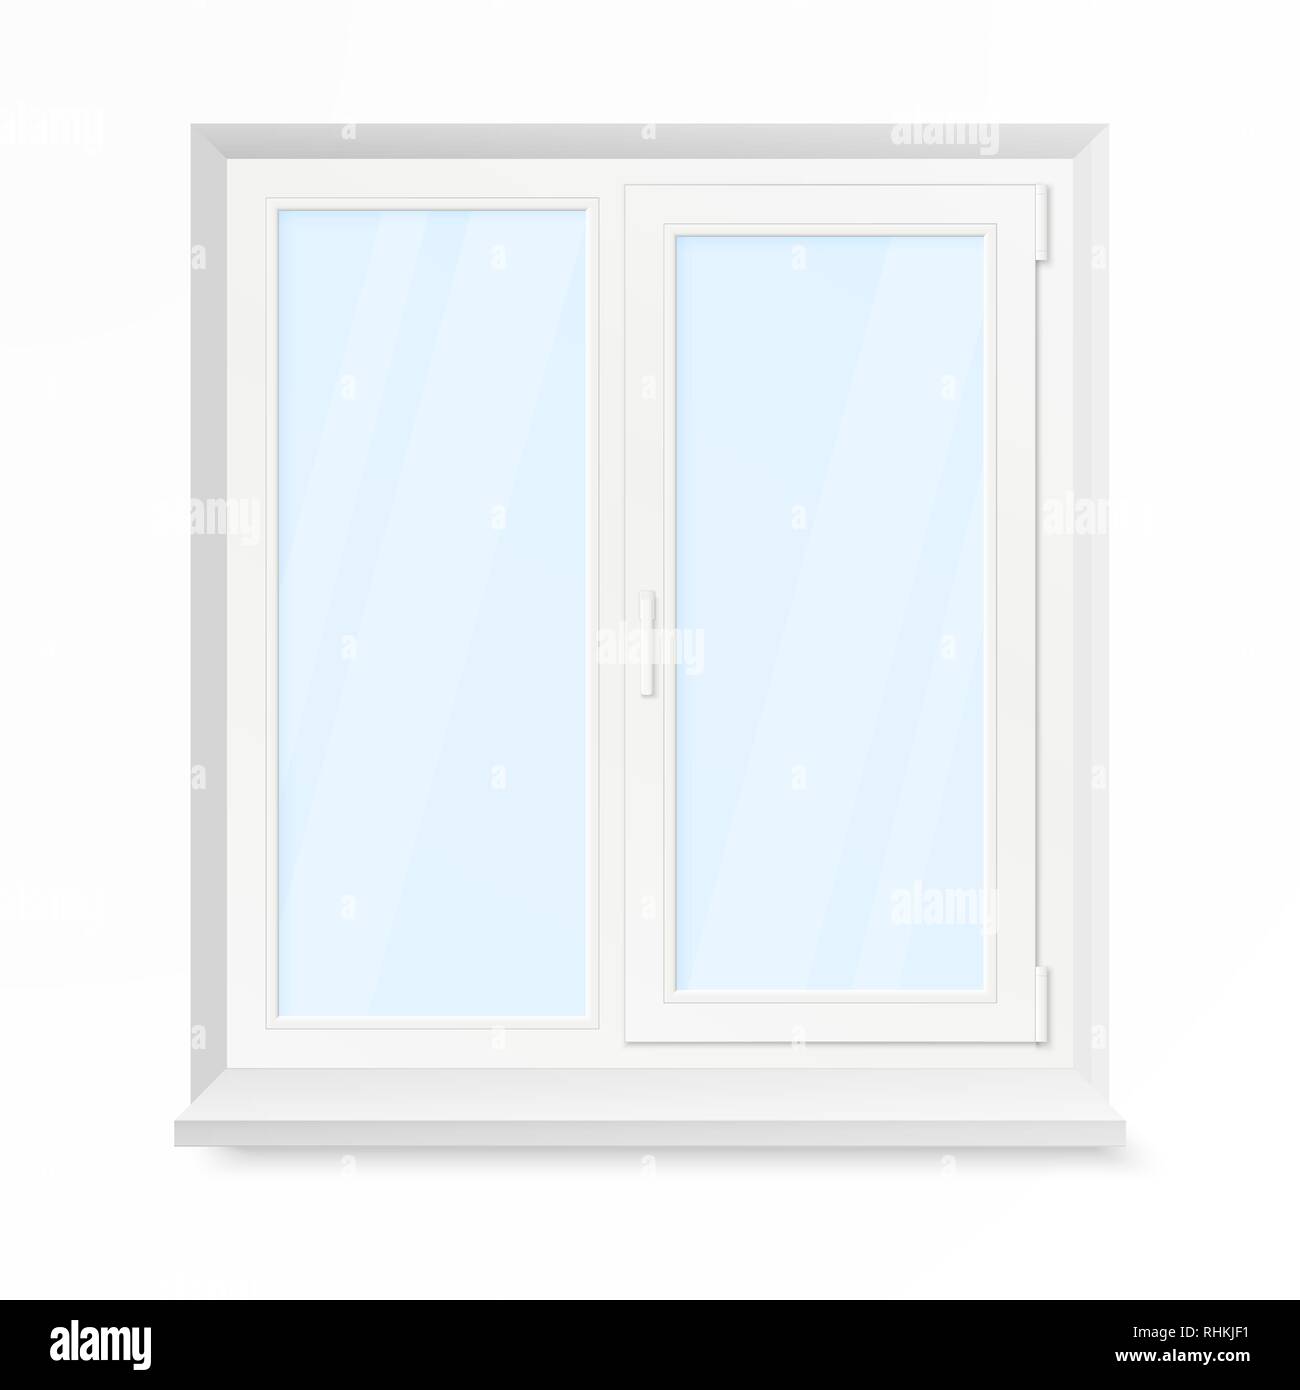 White Office Plastic Window. Window Front View. Vector Illustration Isolated on White Background Stock Vector